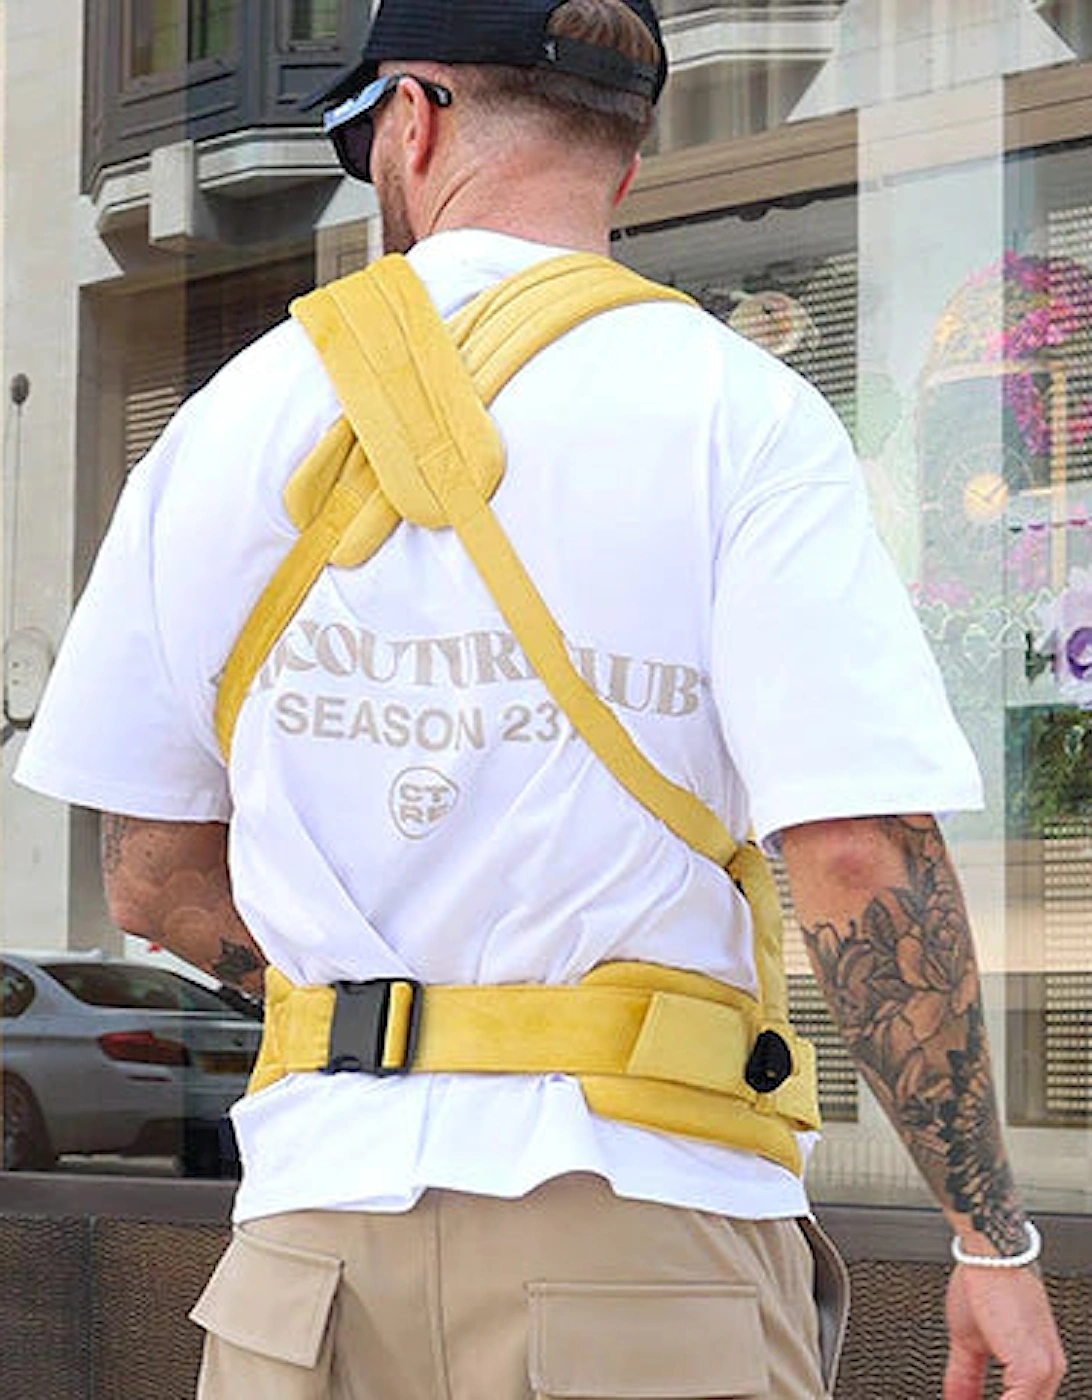 NOMAD™? Baby Carrier -  Gold